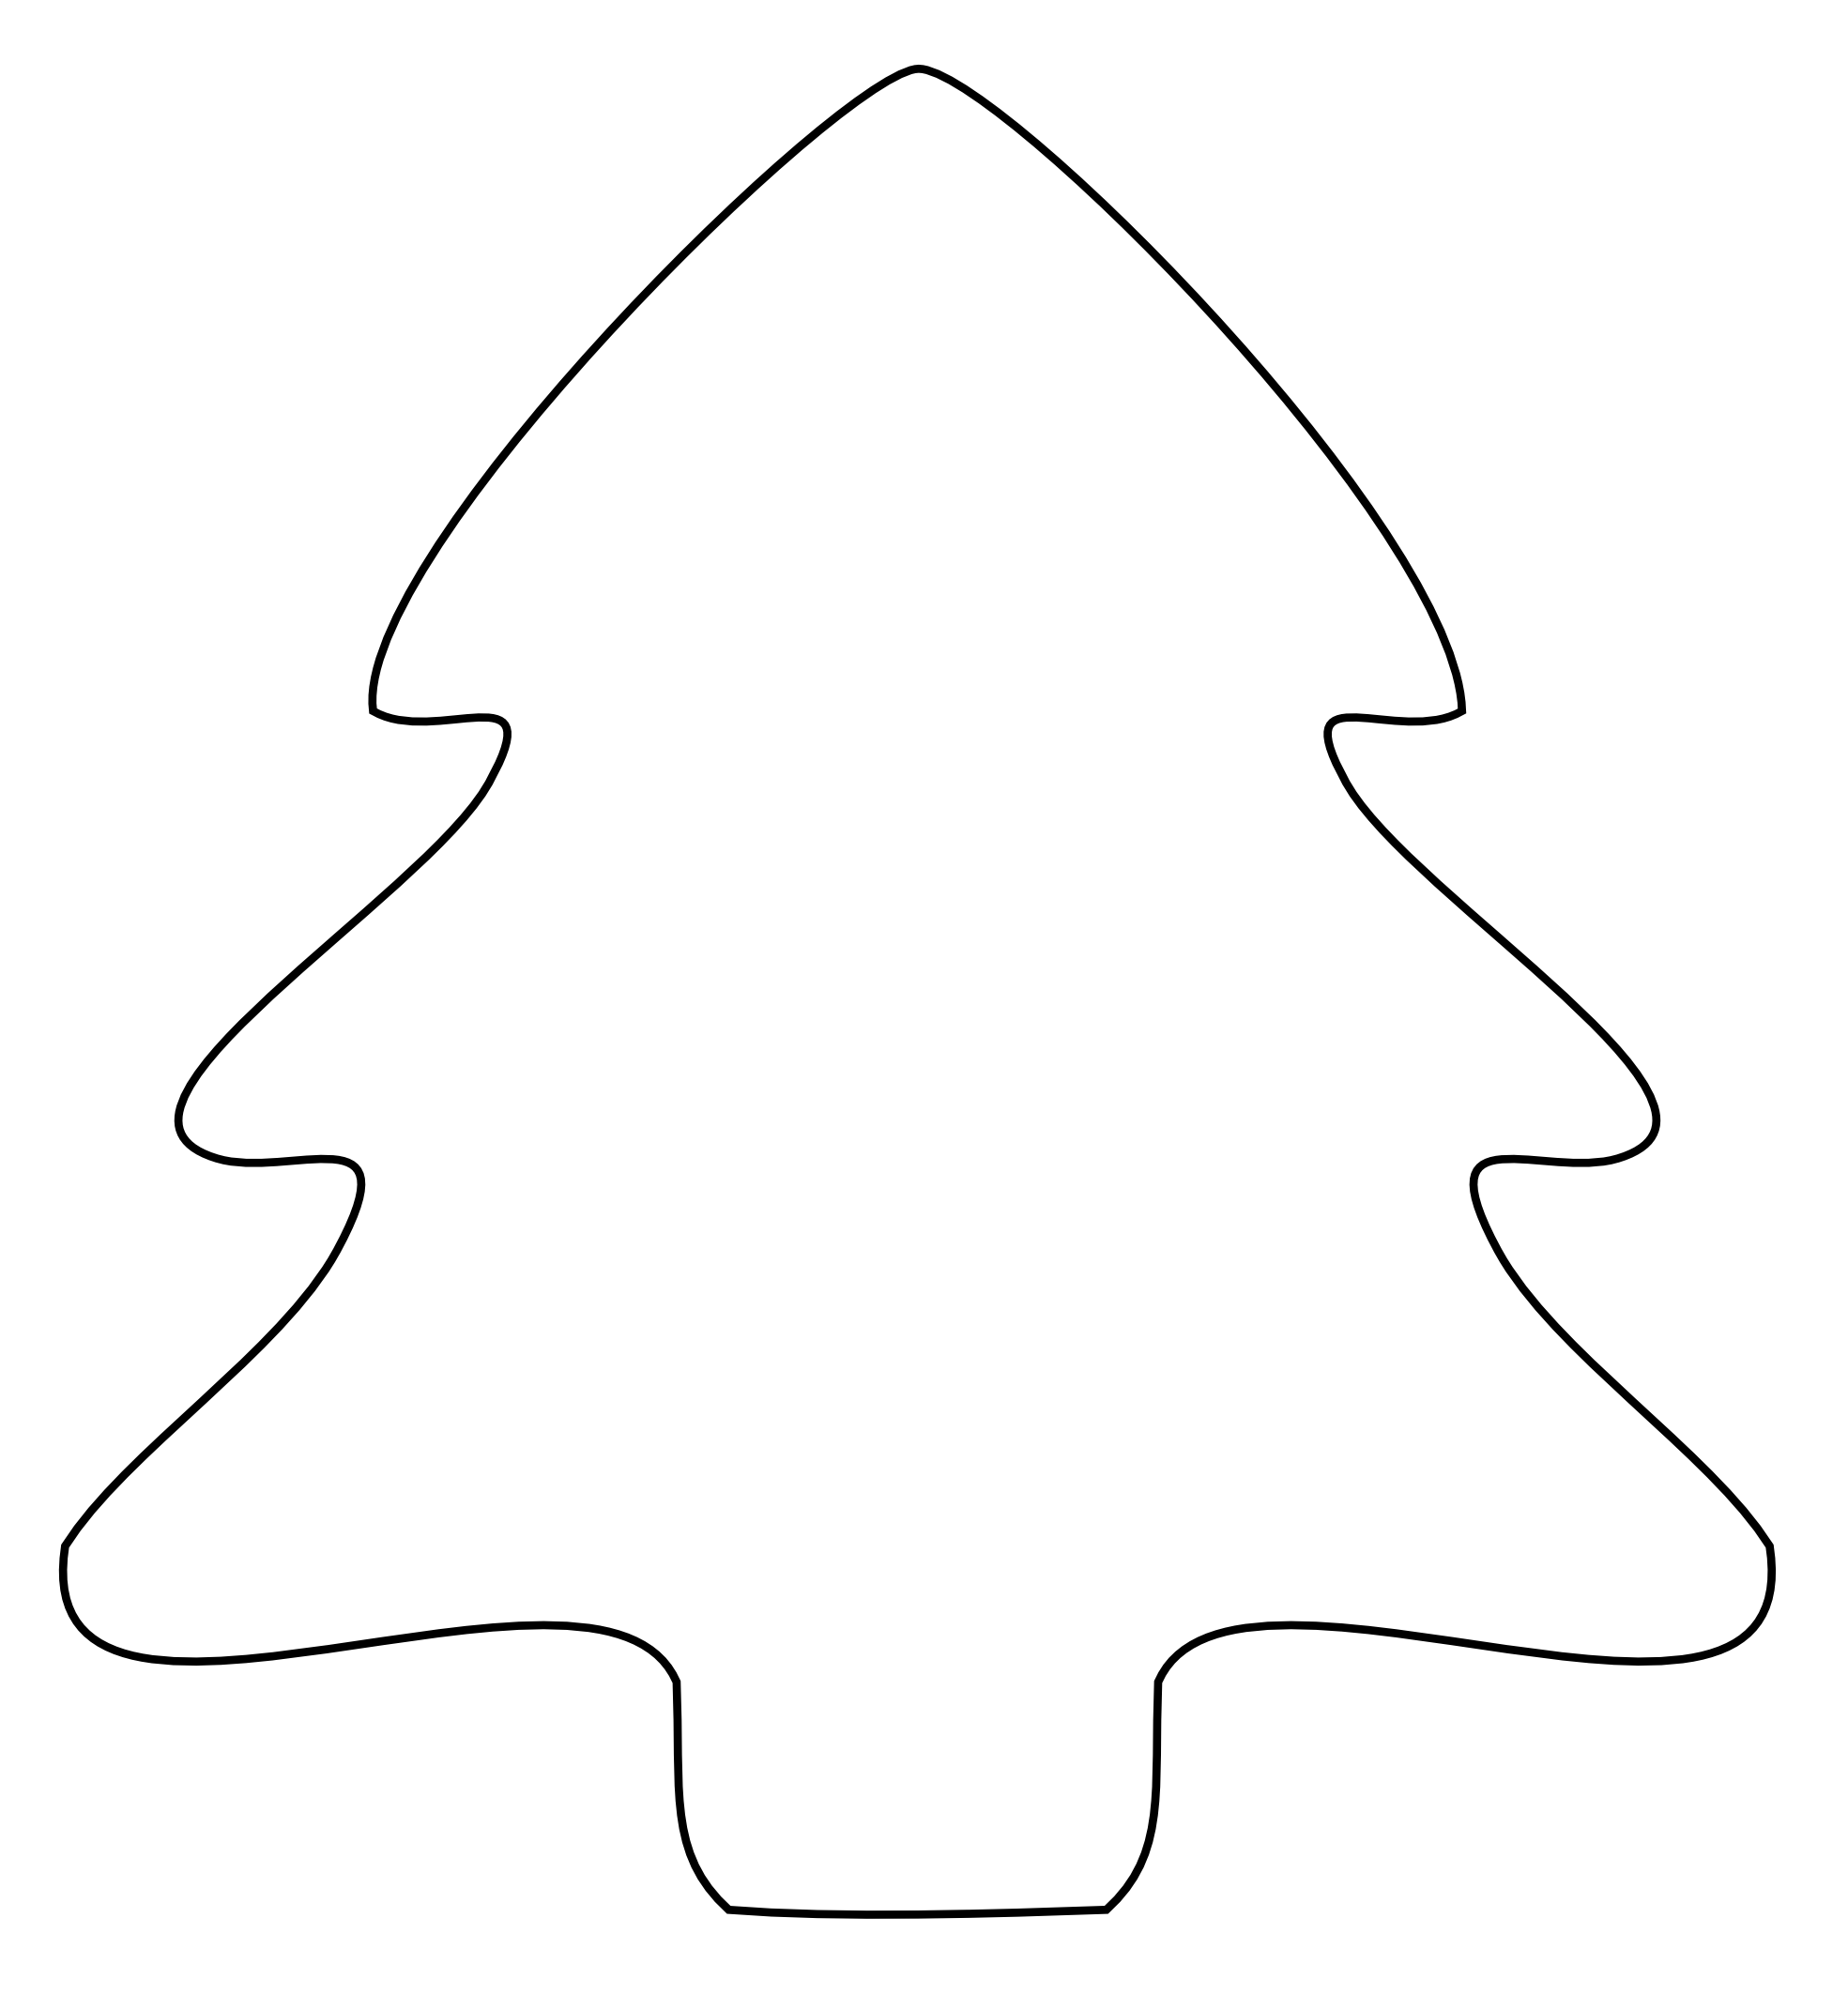 Xmas Stuff For > Christmas Tree Outline Clip Art - Cliparts.co